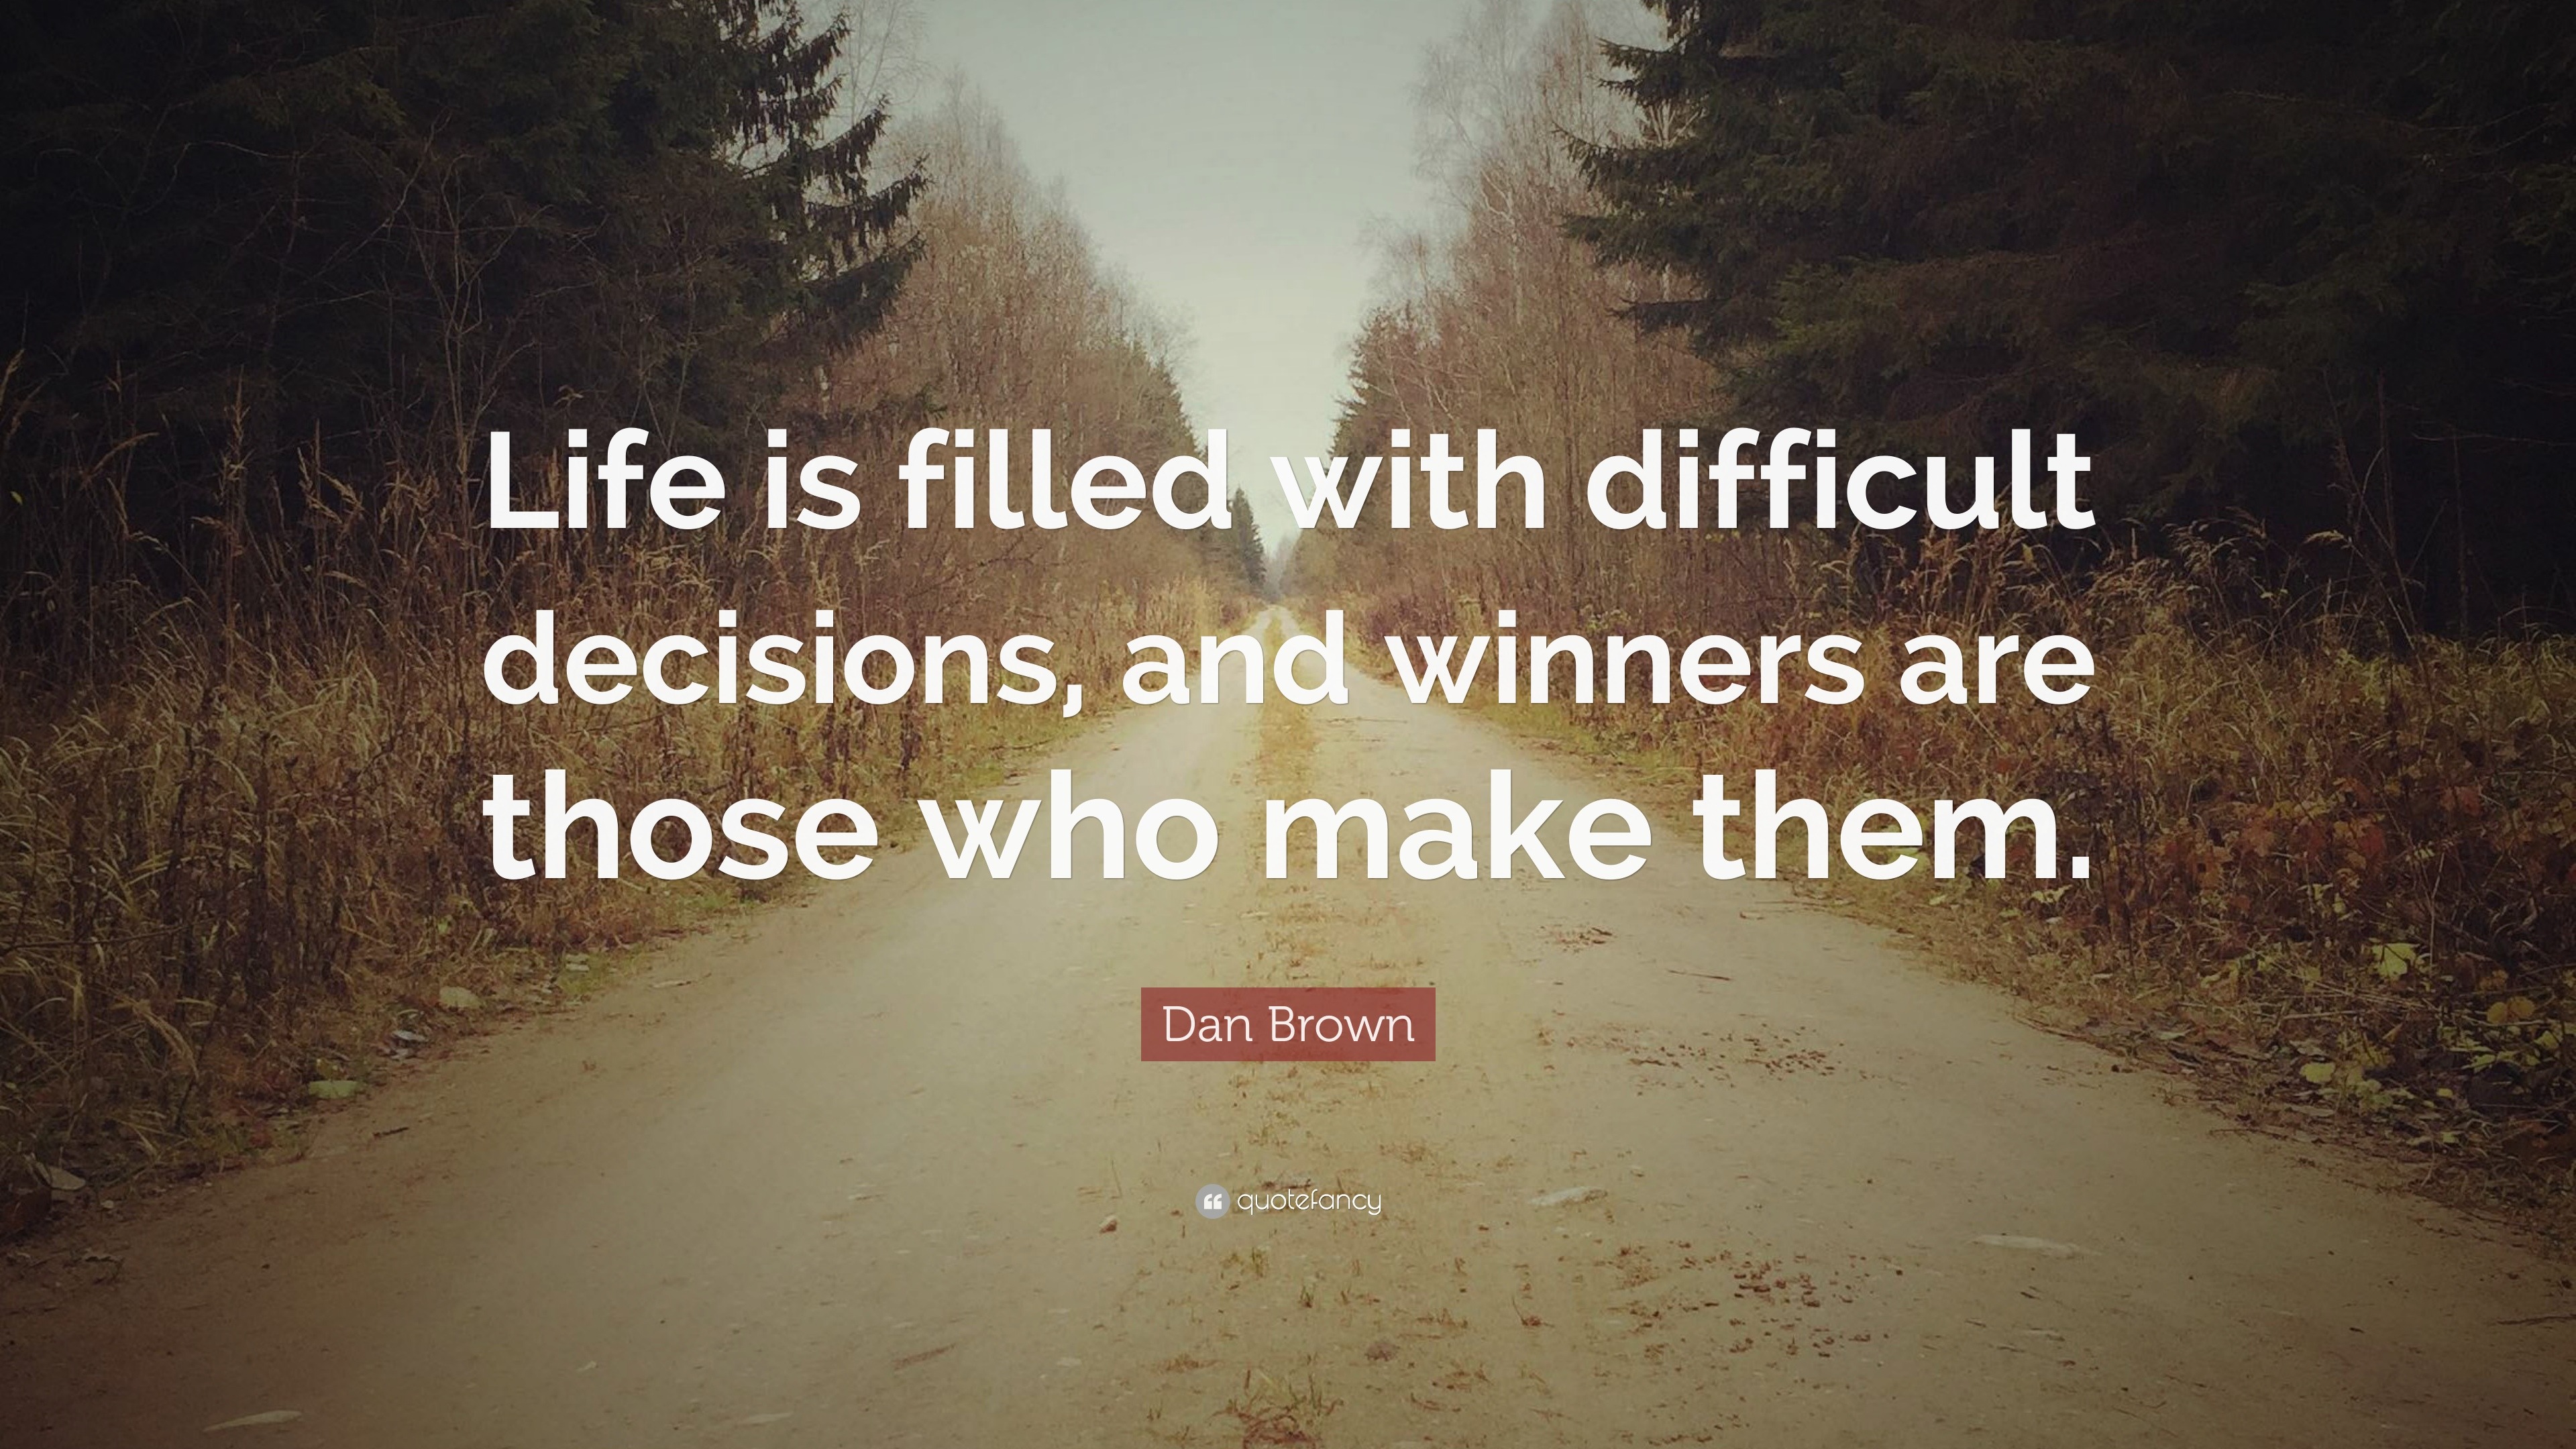 Dan Brown Quote “Life is filled with difficult decisions and winners are those